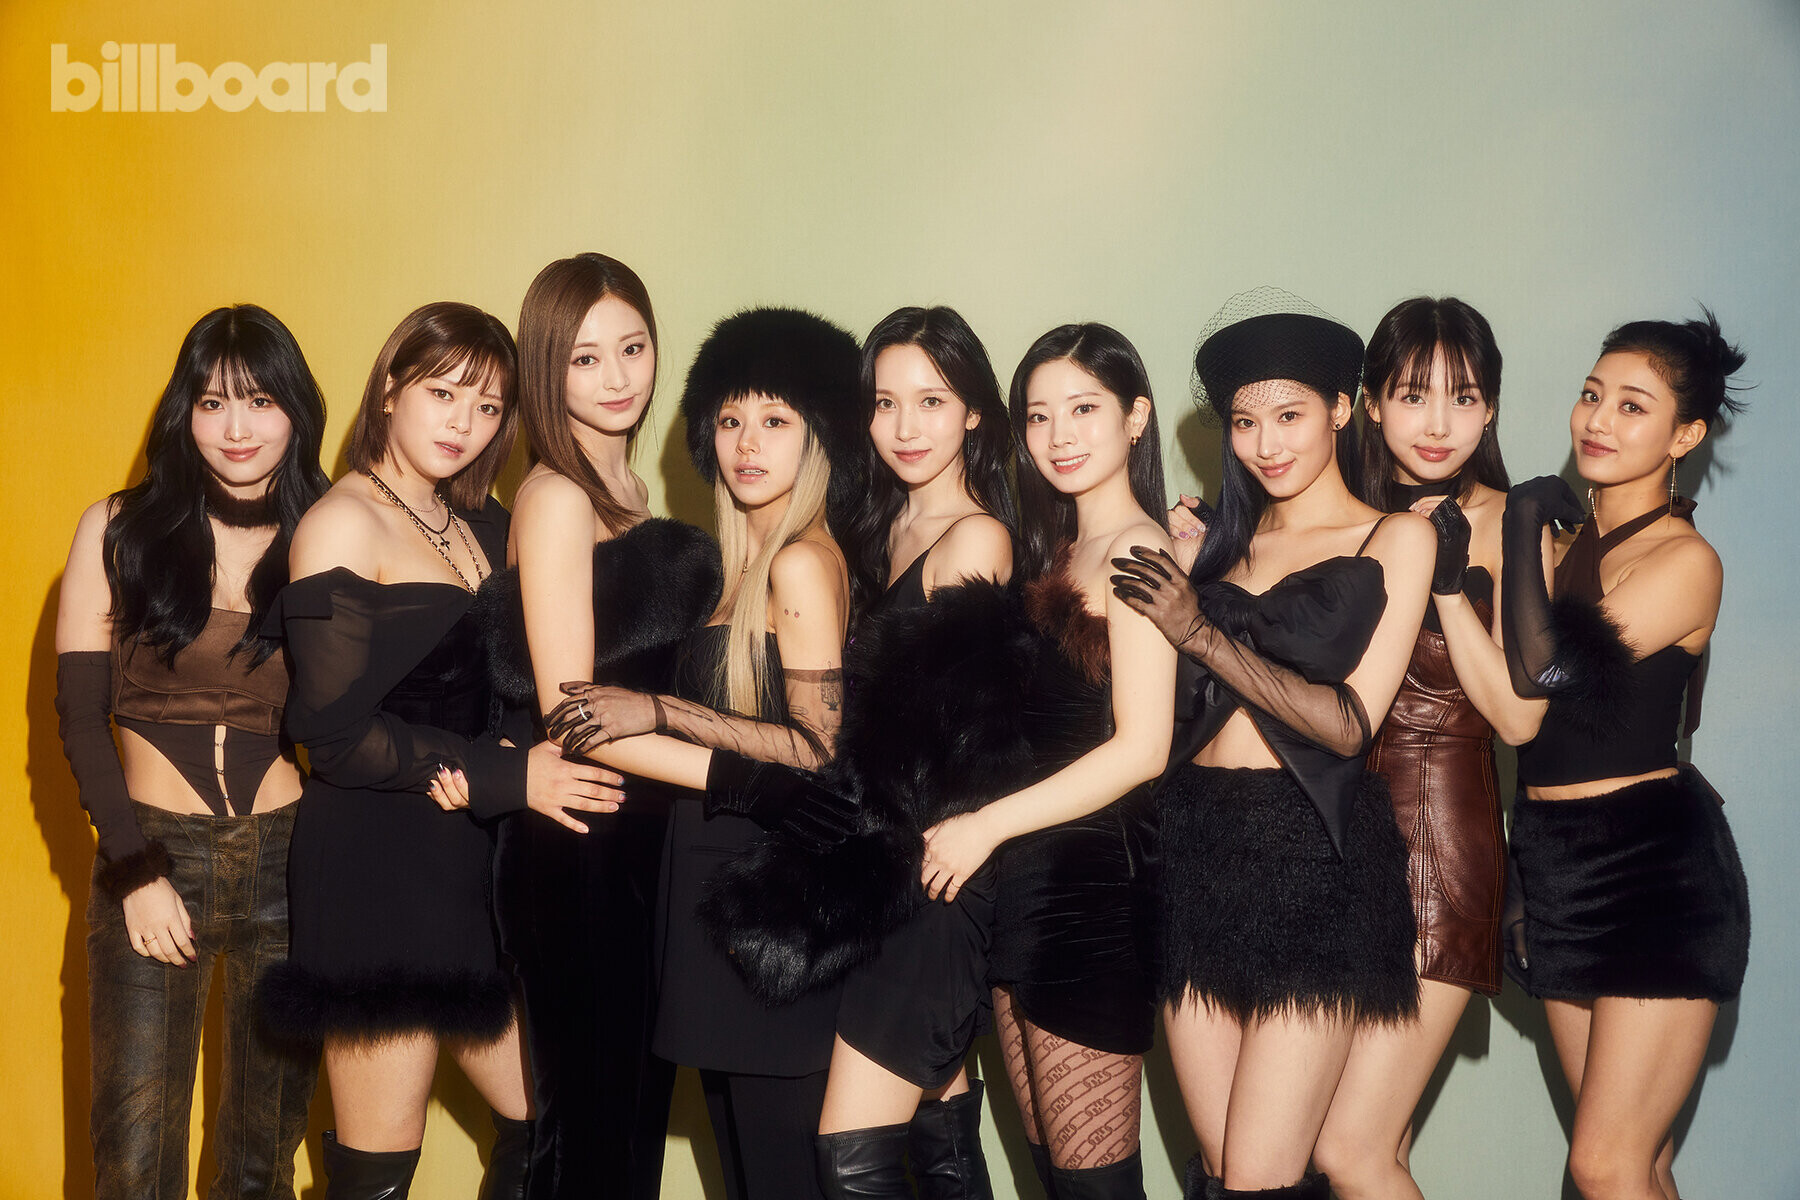 Twice Perform in Coordinated Style at Billboard Women in Music